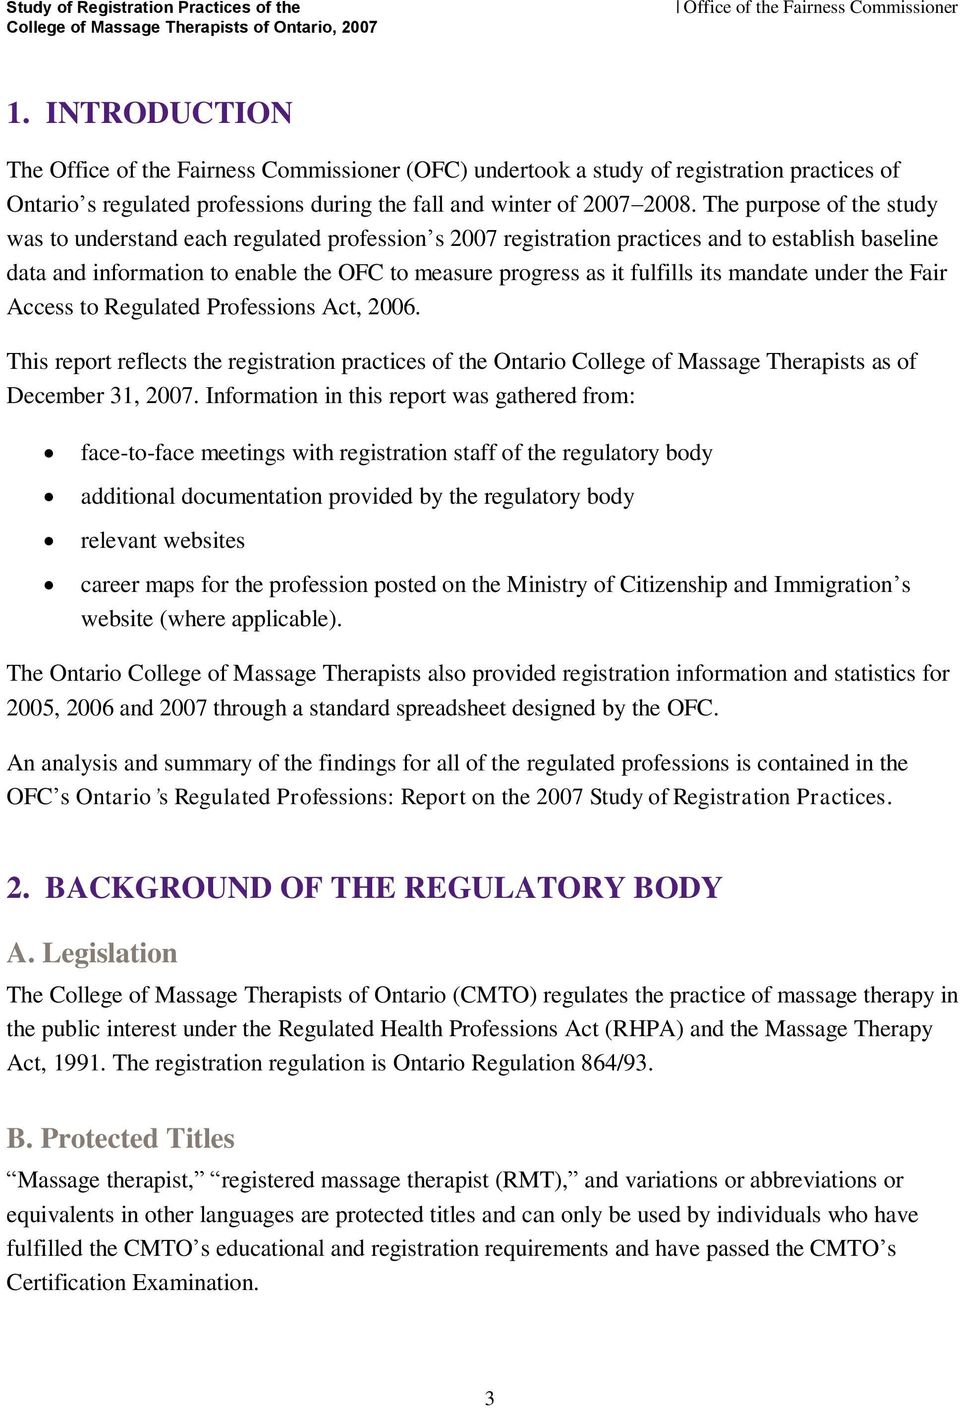 its mandate under the Fair Access to Regulated Professions Act, 2006. This report reflects the registration practices of the Ontario College of Massage Therapists as of December 31, 2007.